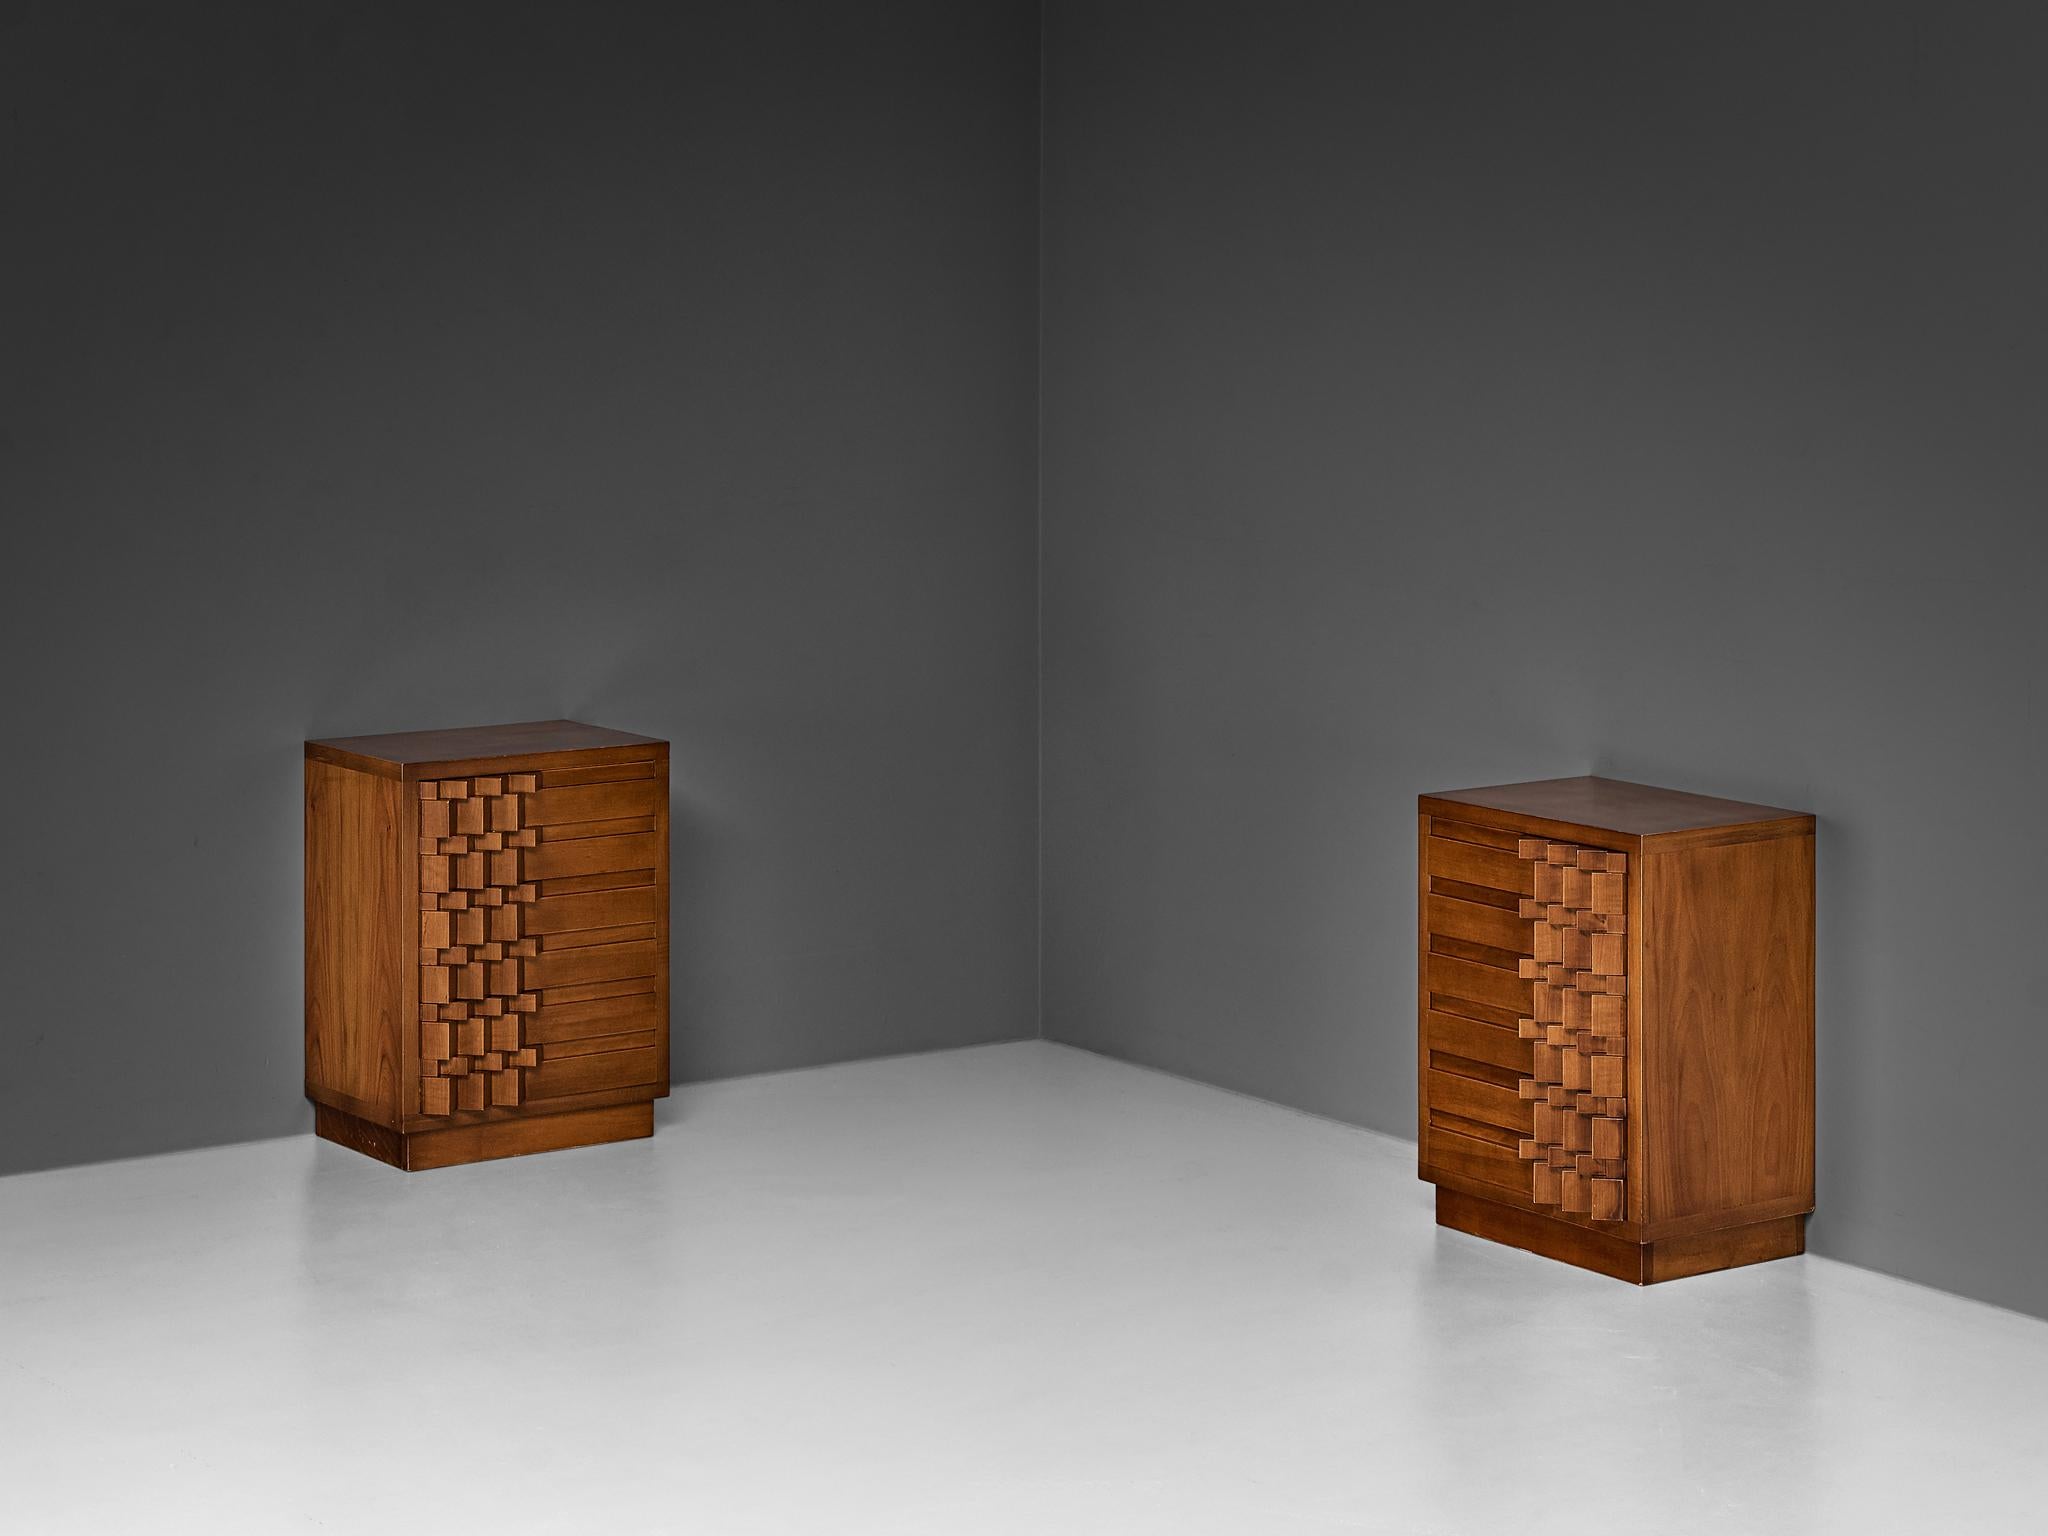 Italian Luciano Frigerio 'Diamante' Pair of Bed Tables with Cubist Graphic Front  For Sale